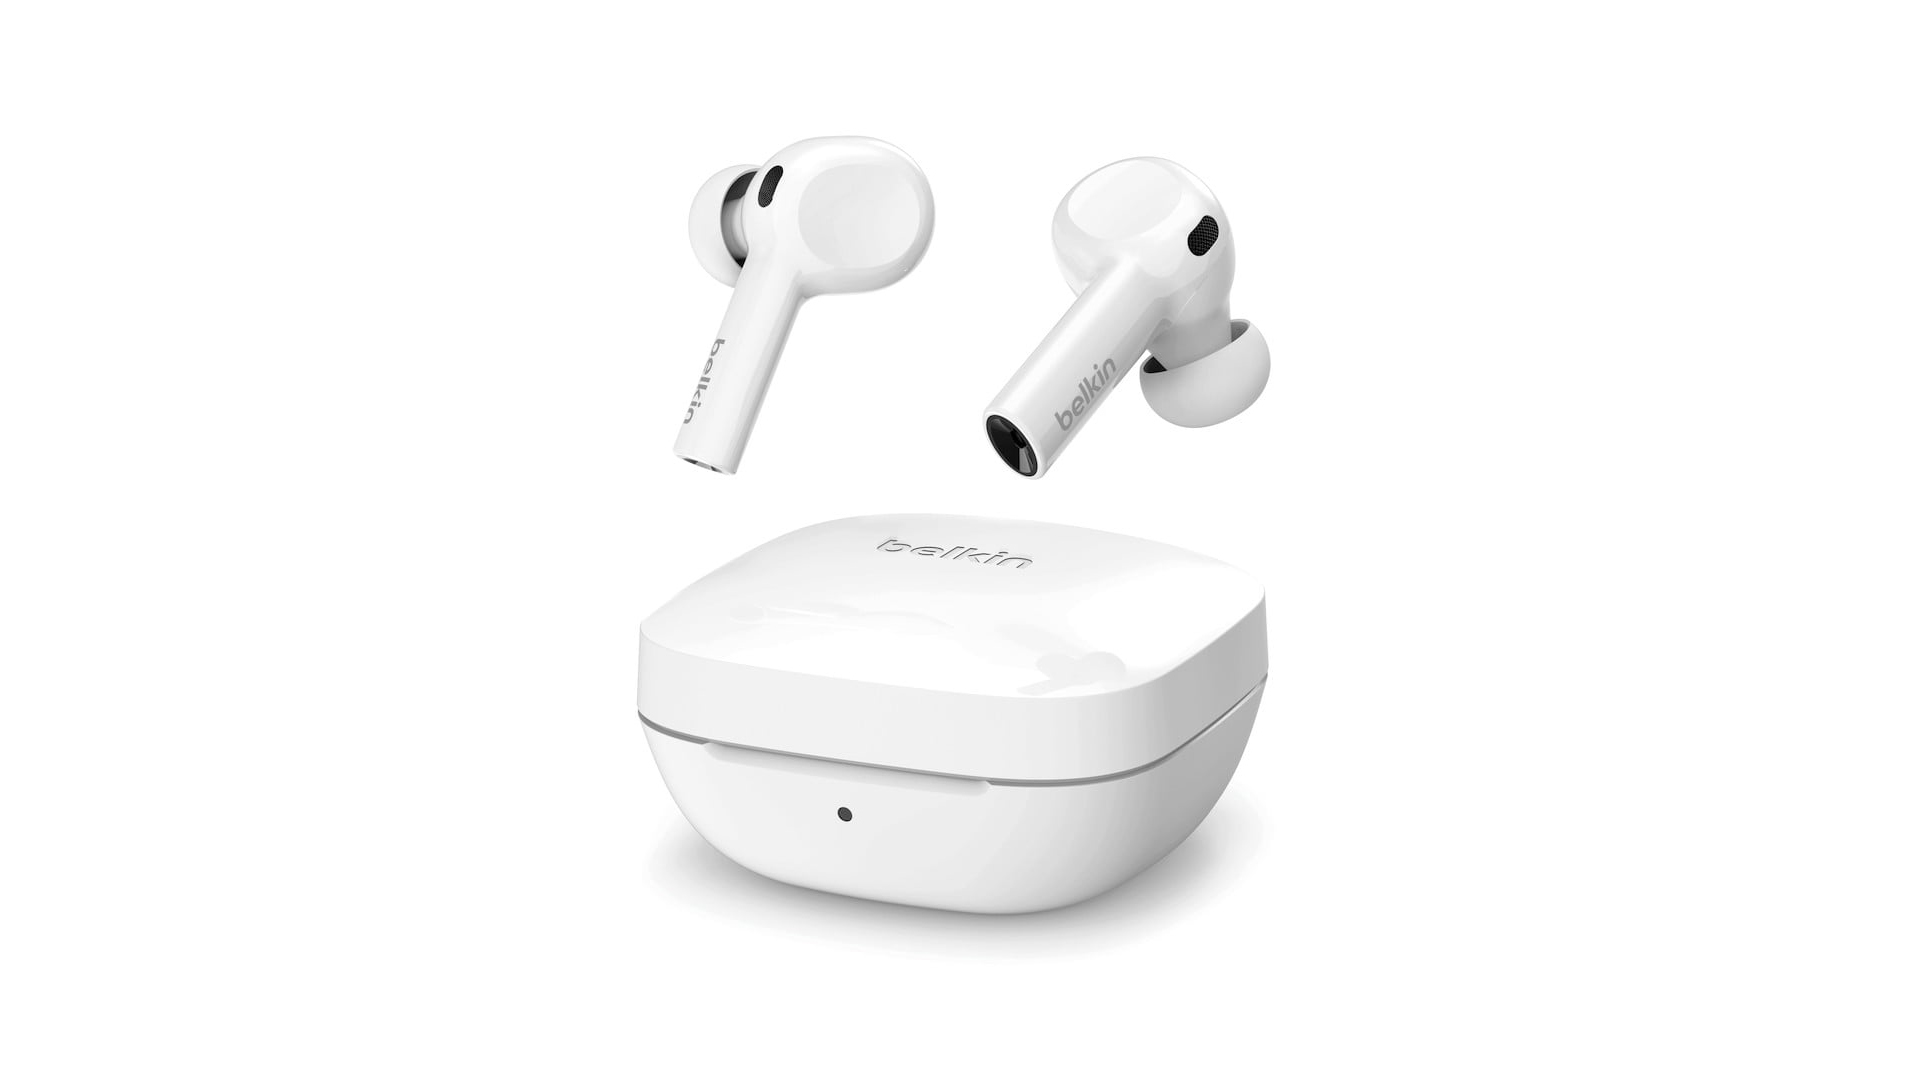 Belkin SOUNDFORM Freedom in white on a white background